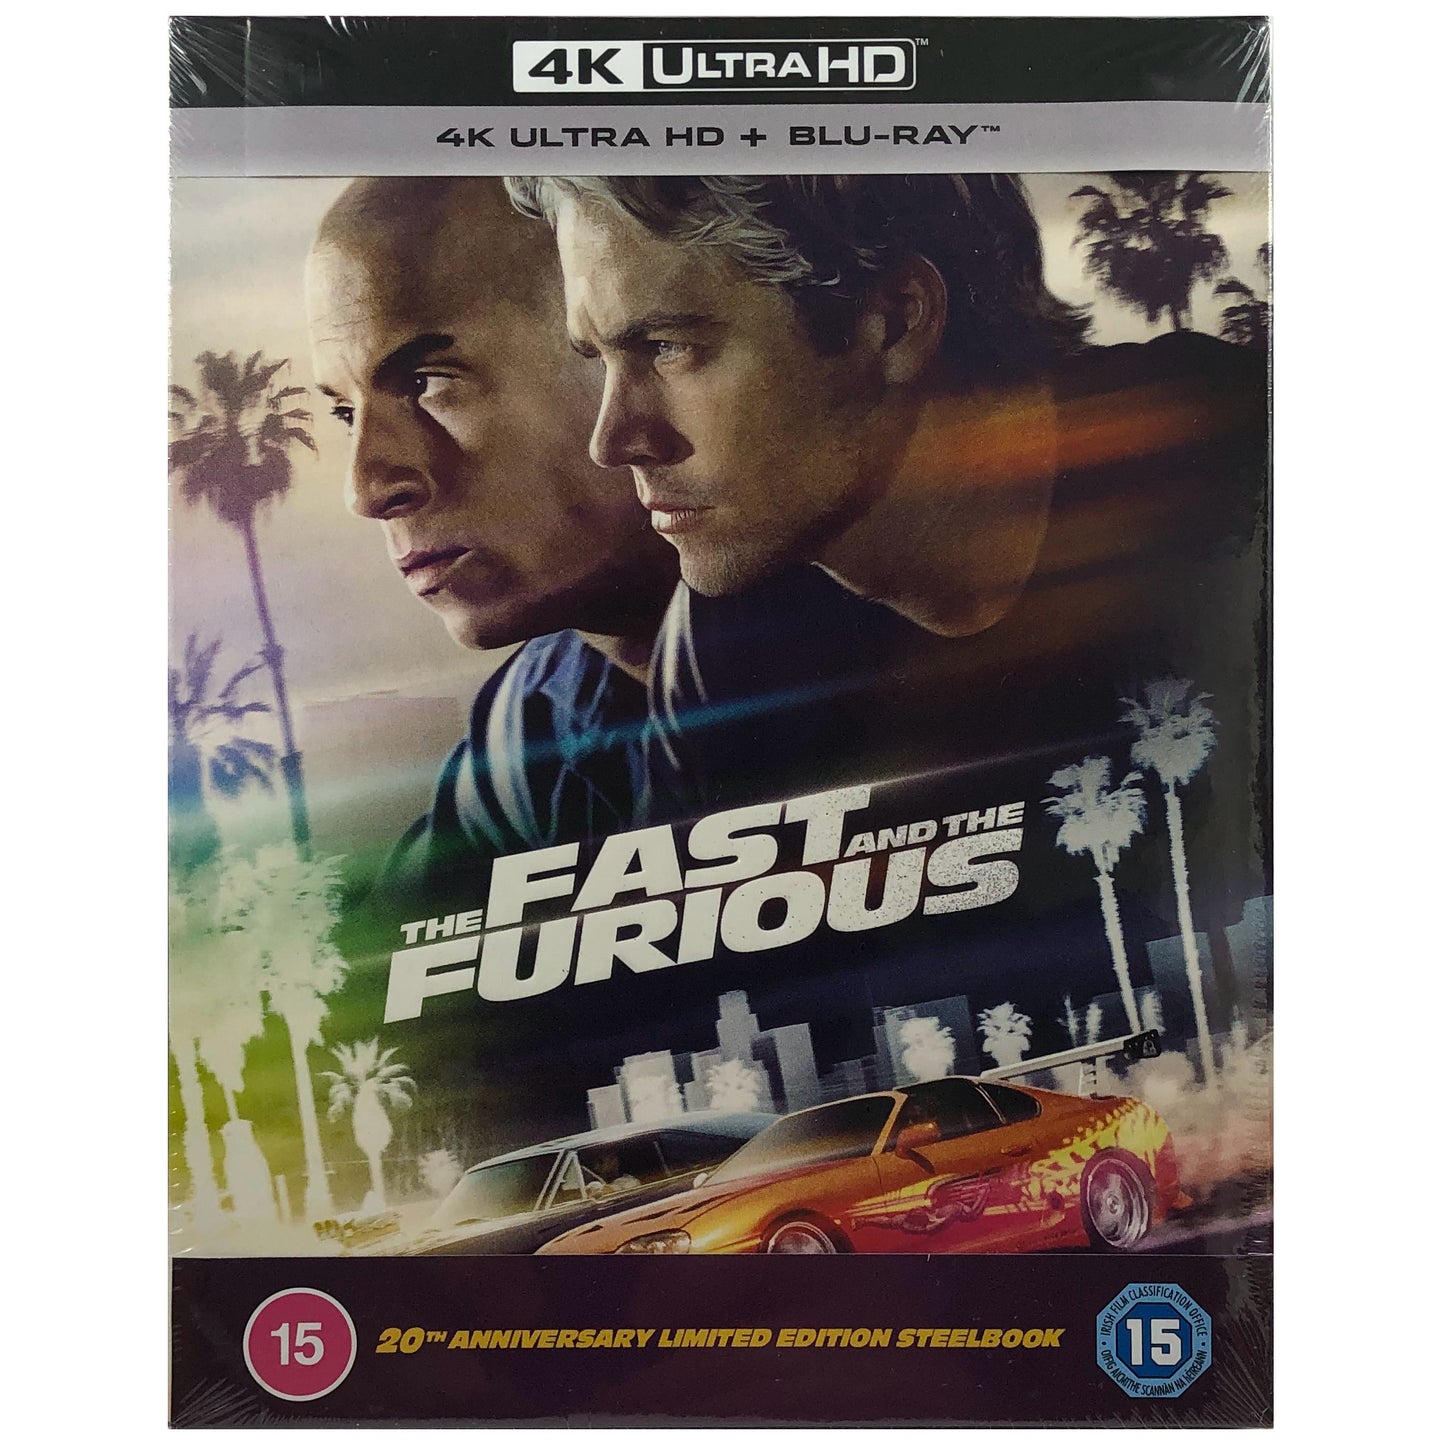 The Fast & The Furious 4K Steelbook - 20th Anniversary Collector's Edition